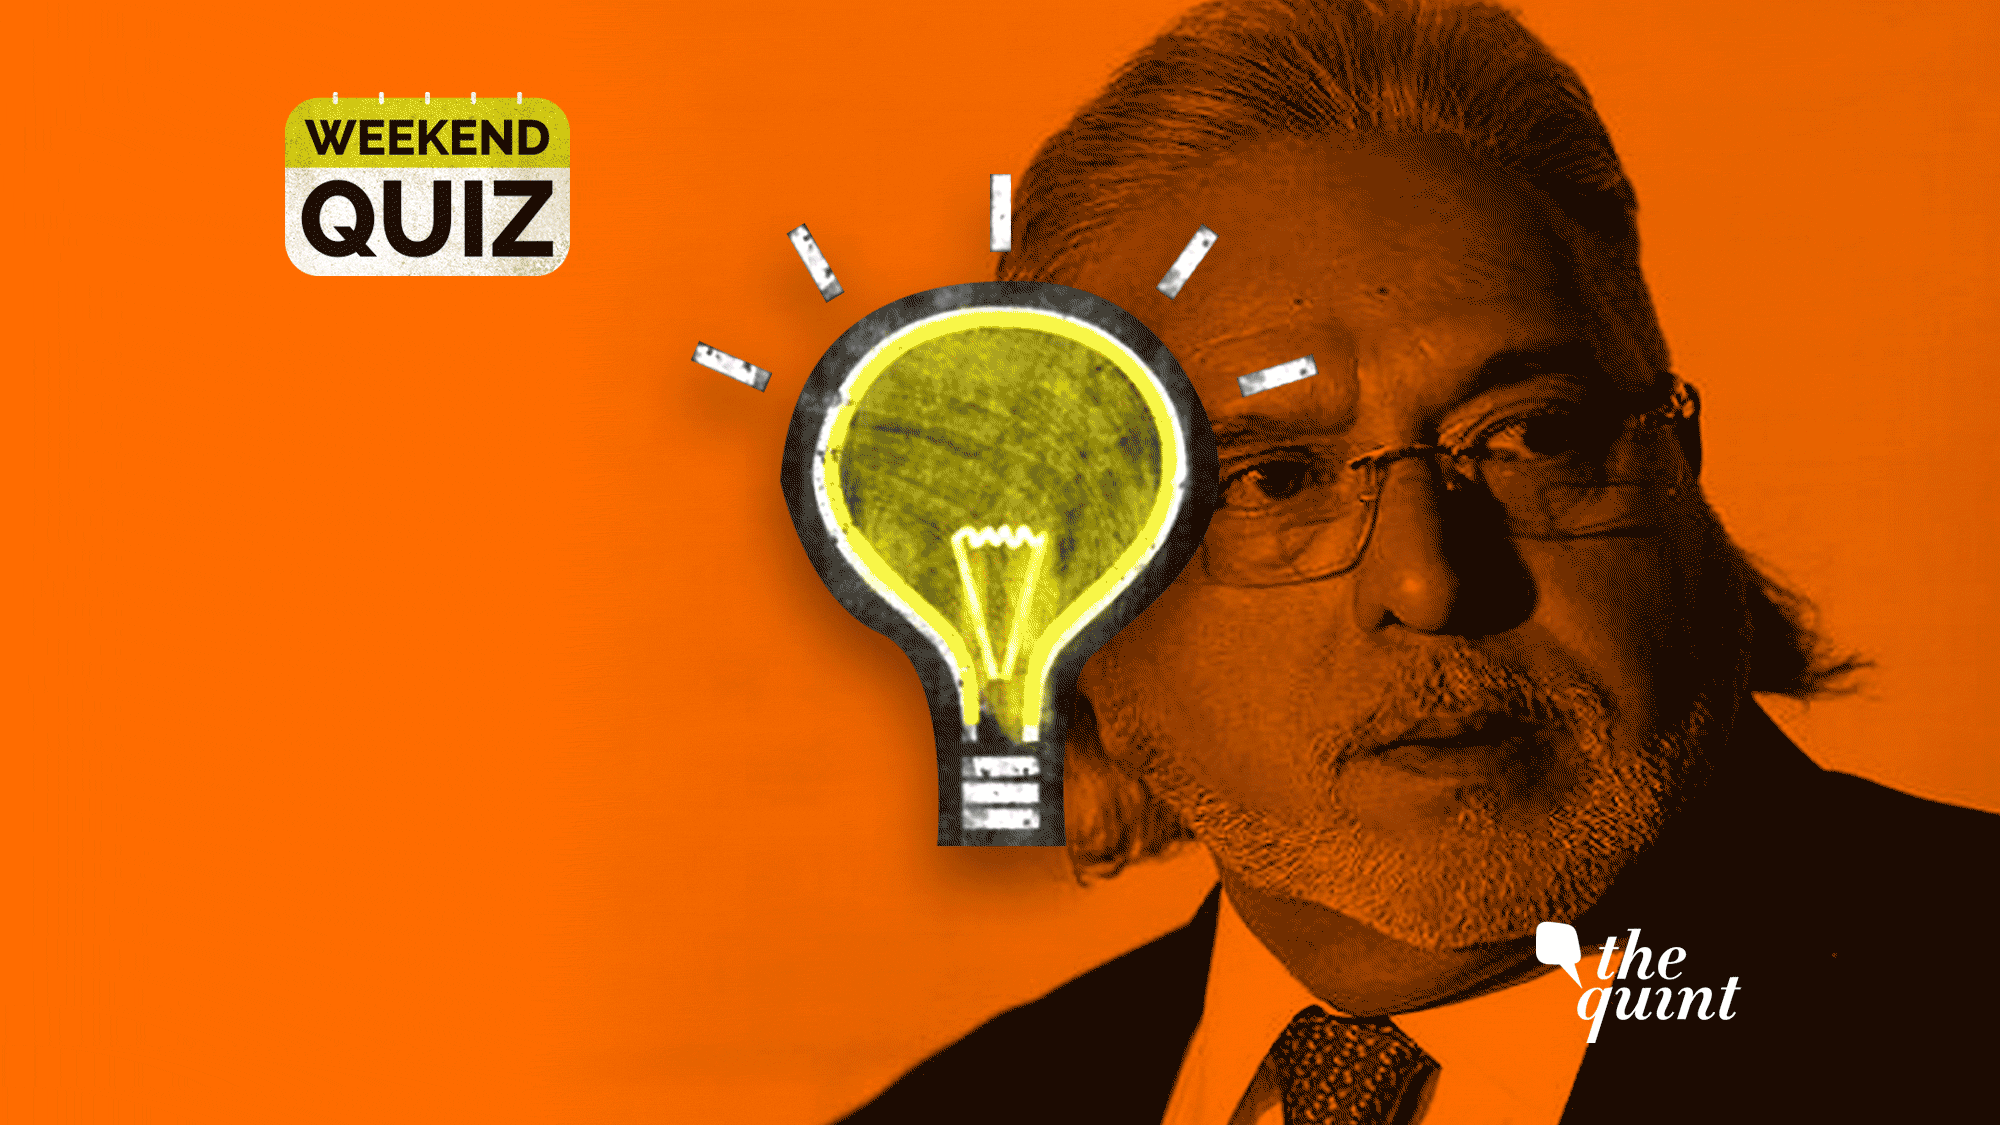 Take the Quint’s weekend quiz to know how up-to-date you are.